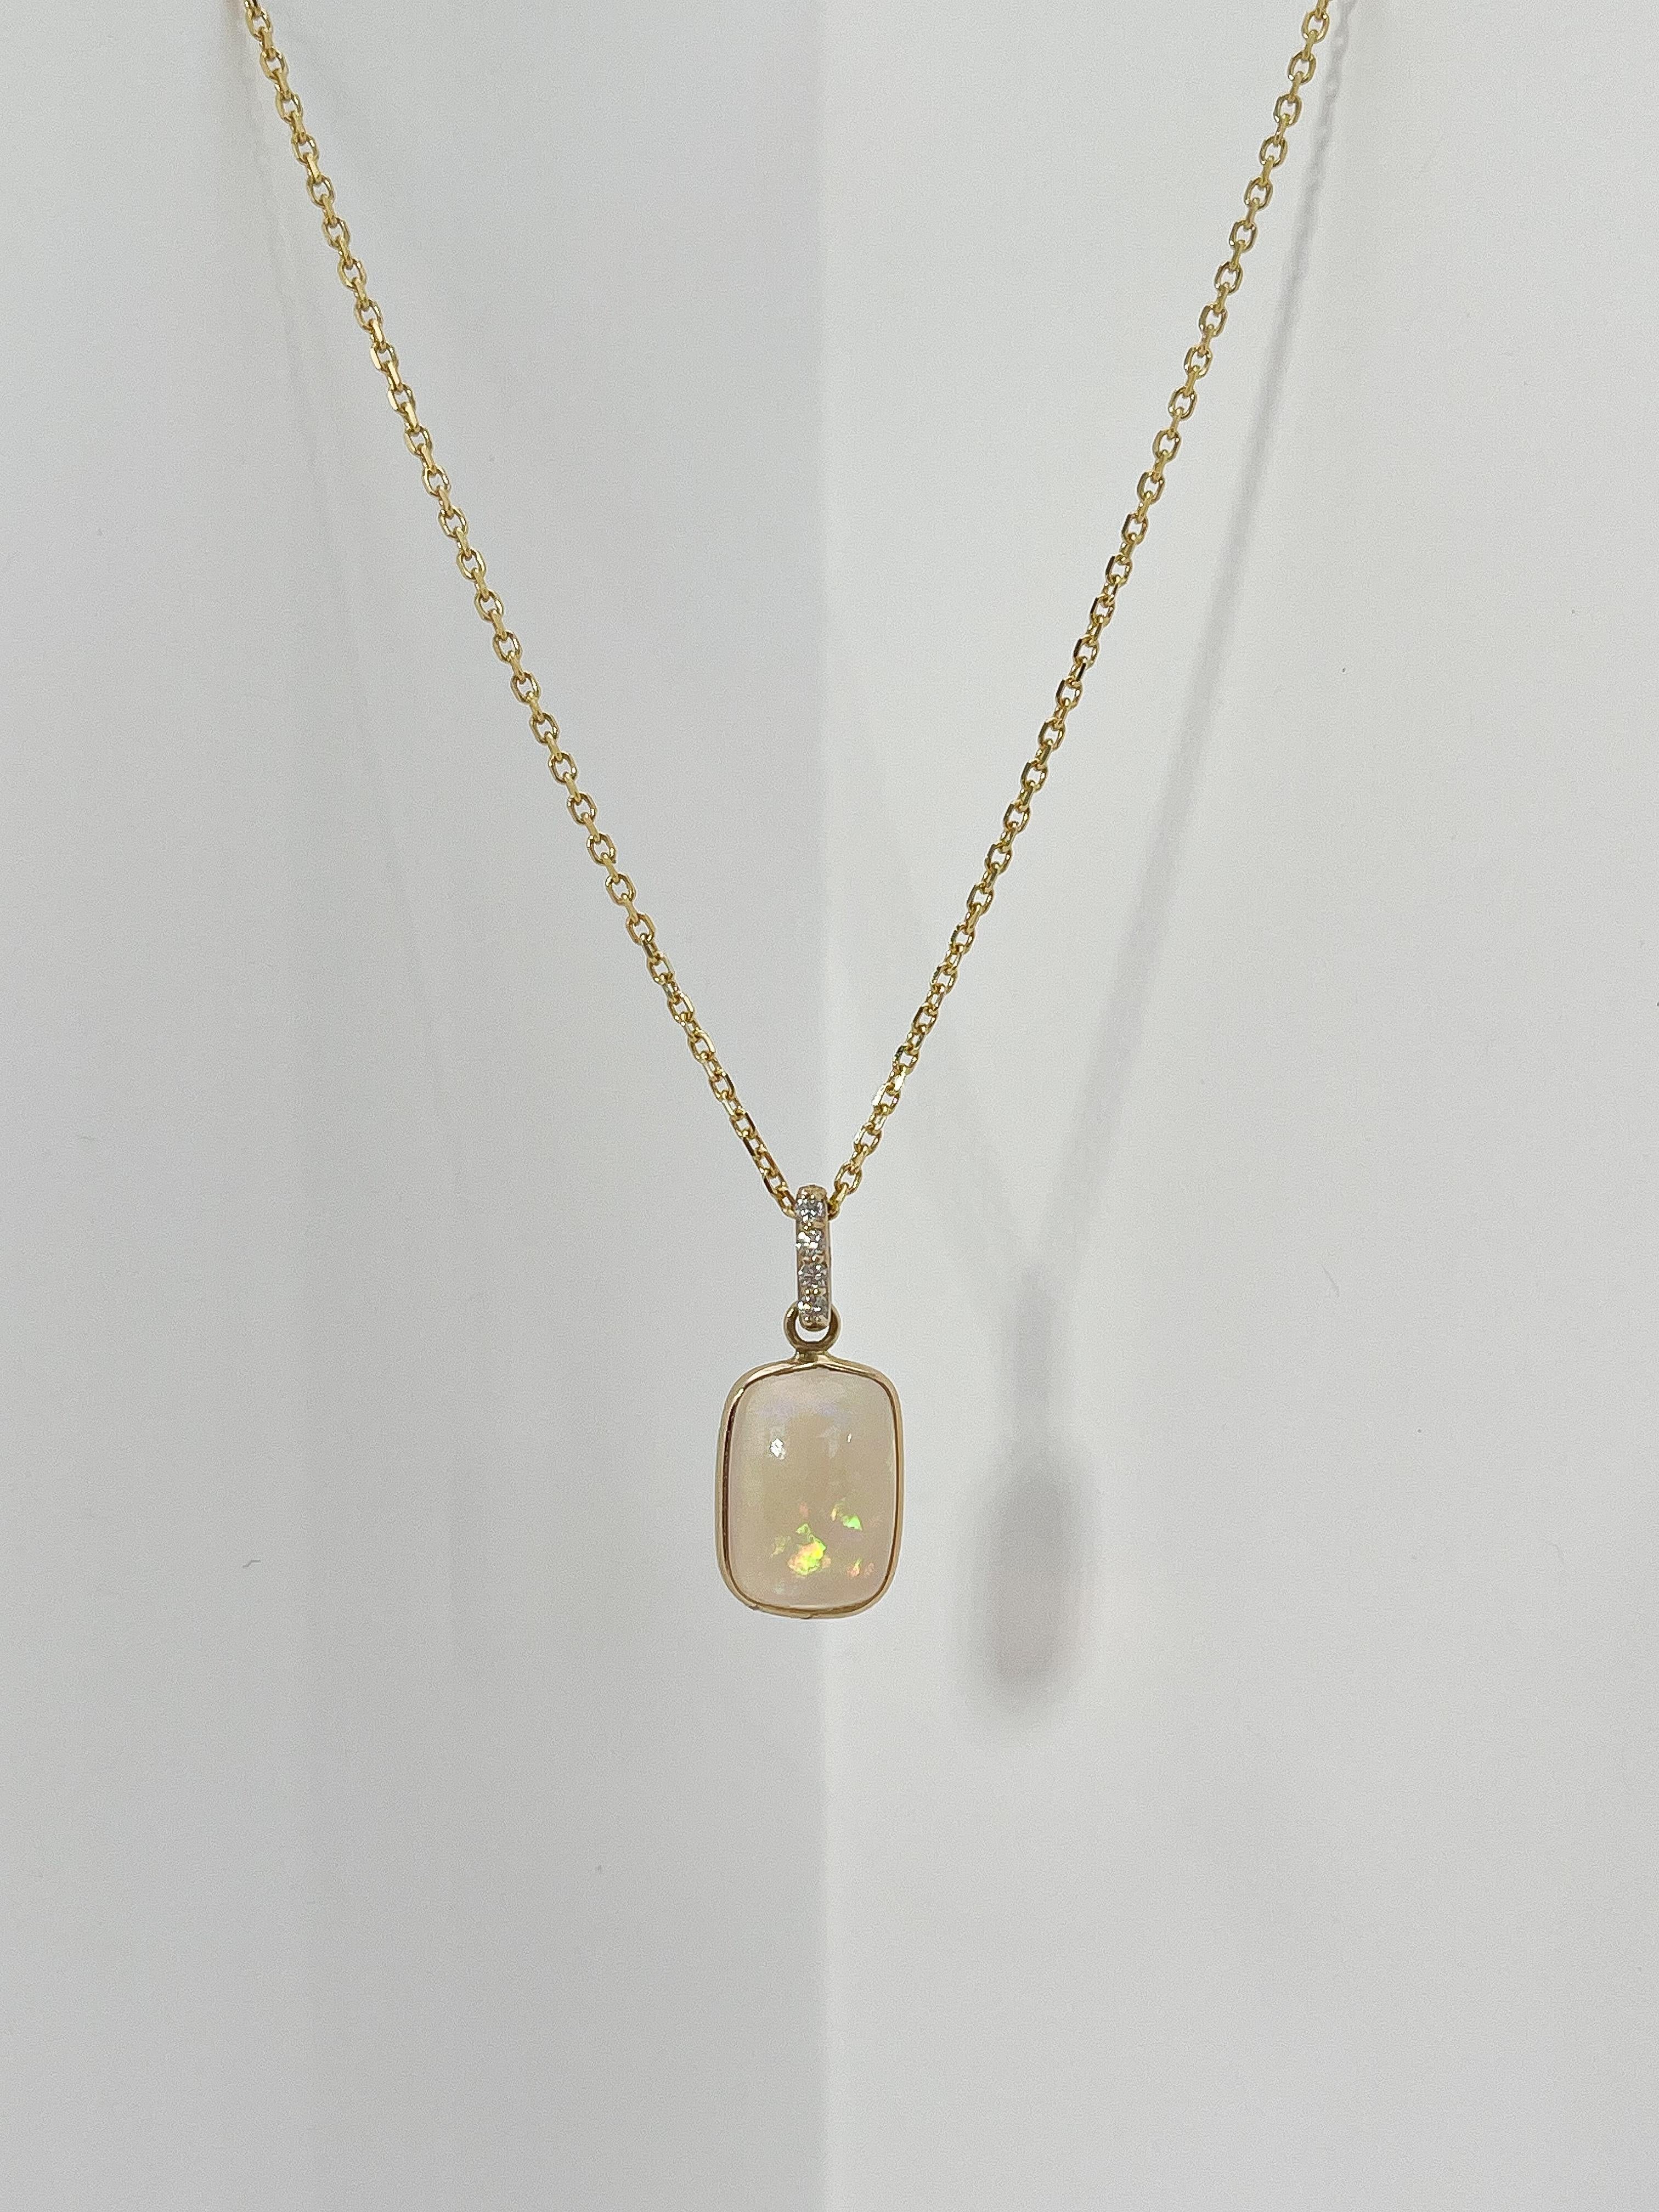 14k yellow gold opal and .06 CTW diamond pendant necklace. The diamonds in the bail are all round, the measurements of the pendant are 12.5 x 9, and the length of the necklace is 16 inches, and it has a total weight of 3.13 grams.